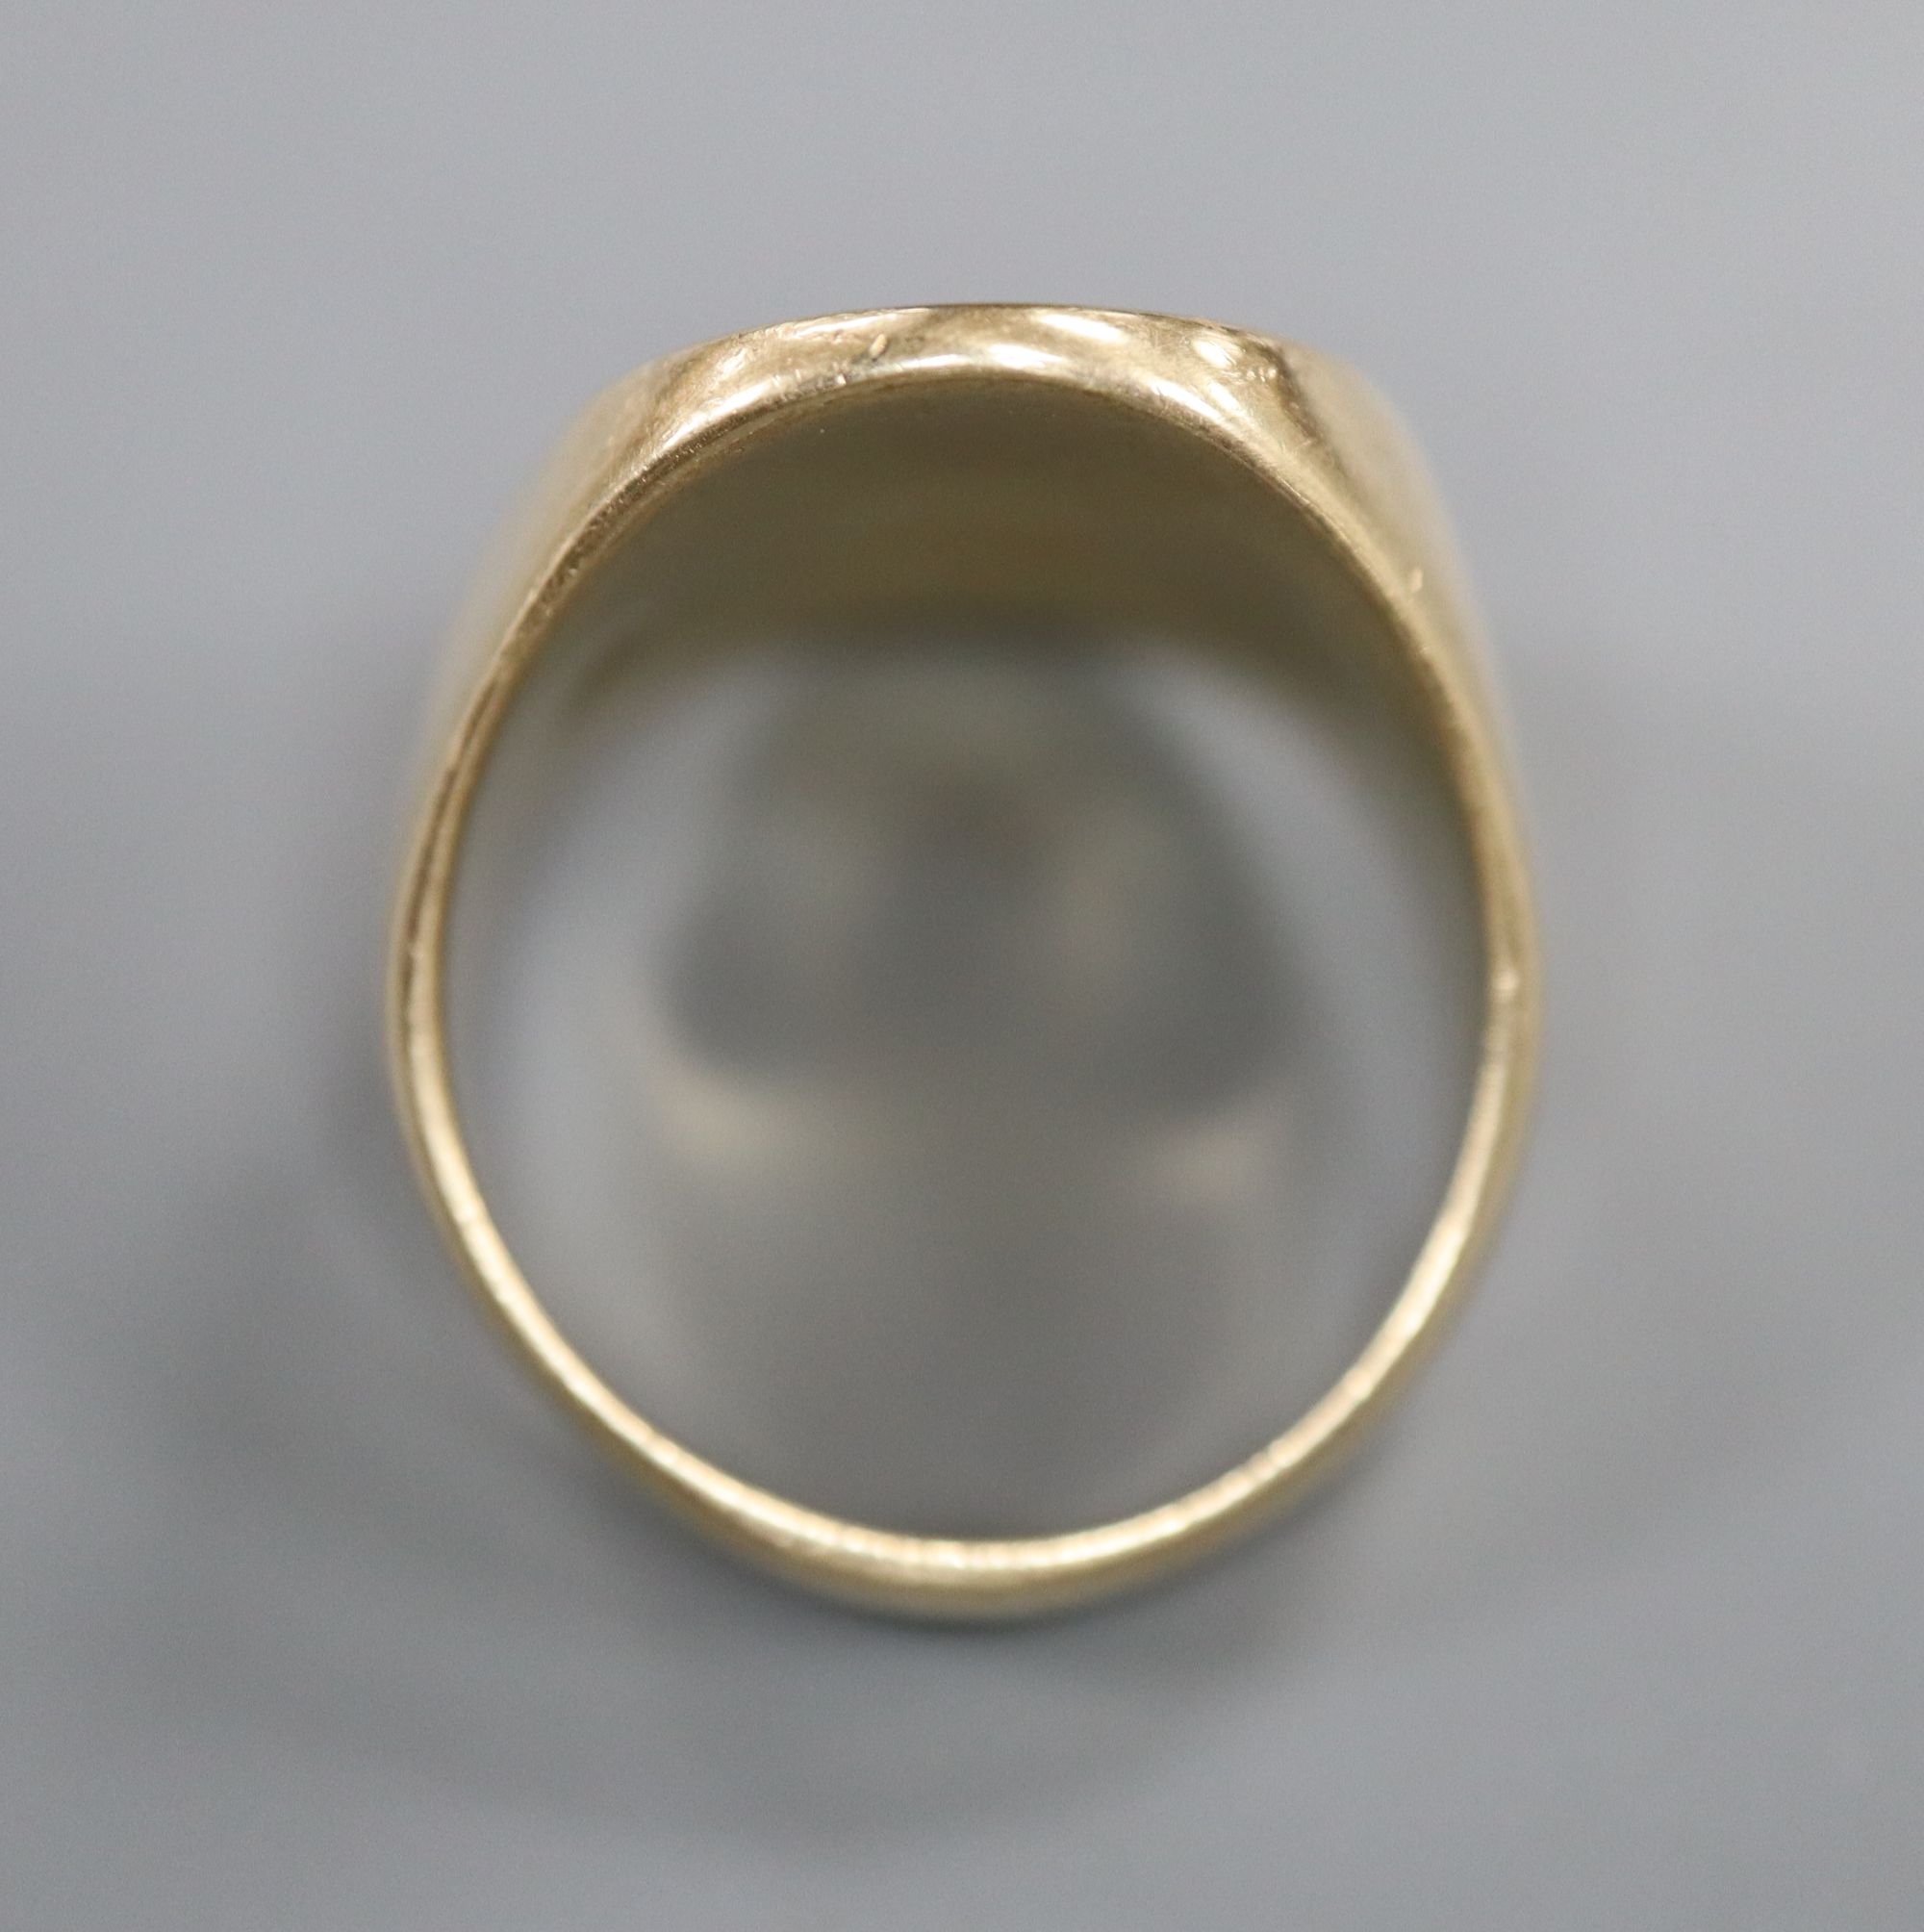 A 14kt yellow metal seal ring, engraved with ornate crest and the motto Carpe Diem, size R, 16.9 grams.